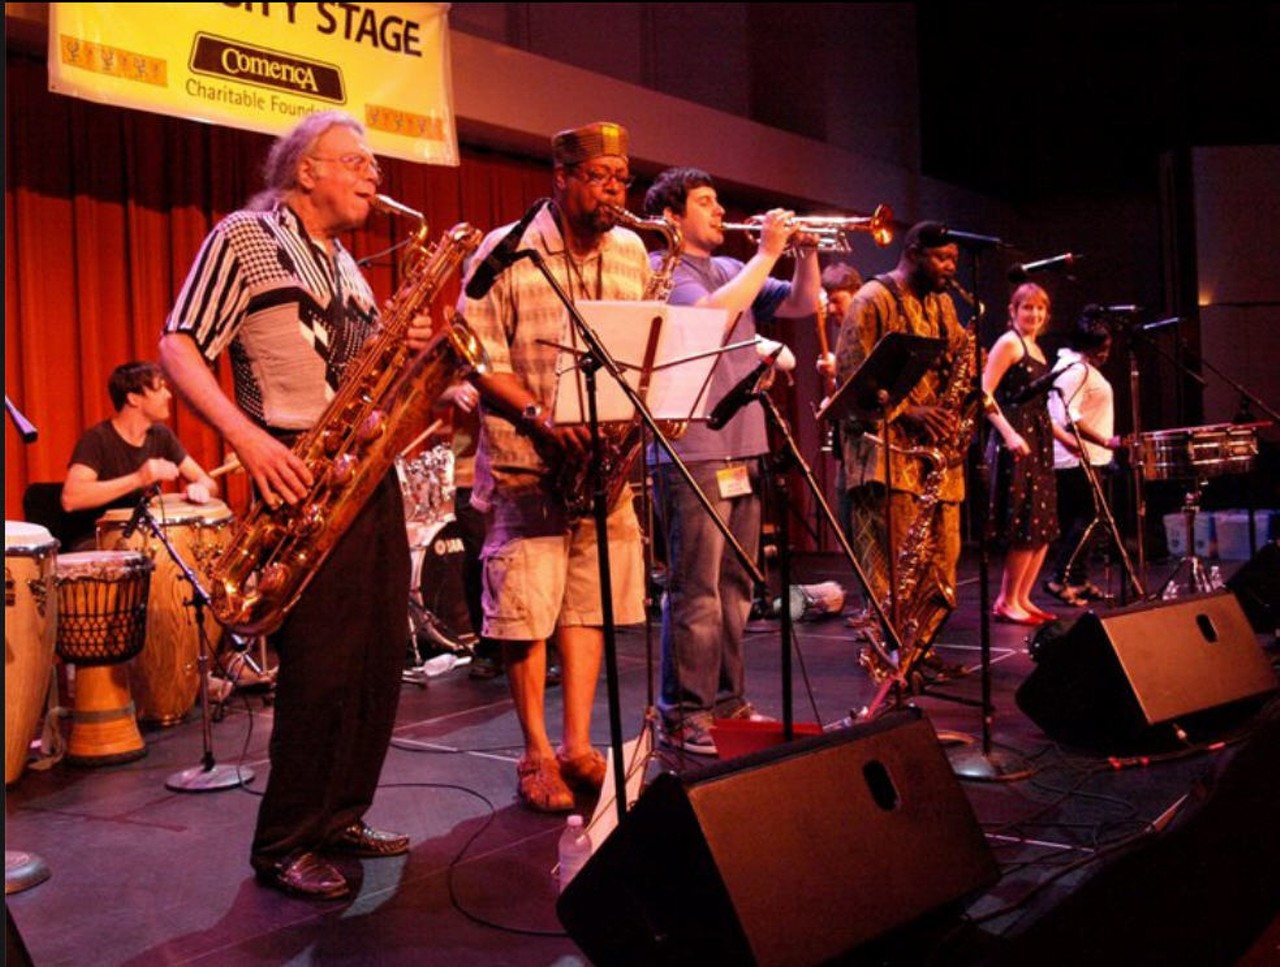 Odu Afro-beat Orchestra is a Detroit based ensemble exploring the legacy of Afro-beat while bringing listeners to the dance floor. Catch their performance on Friday, 6/30 at Strohs Main Stage from 10:50-11:50pm.